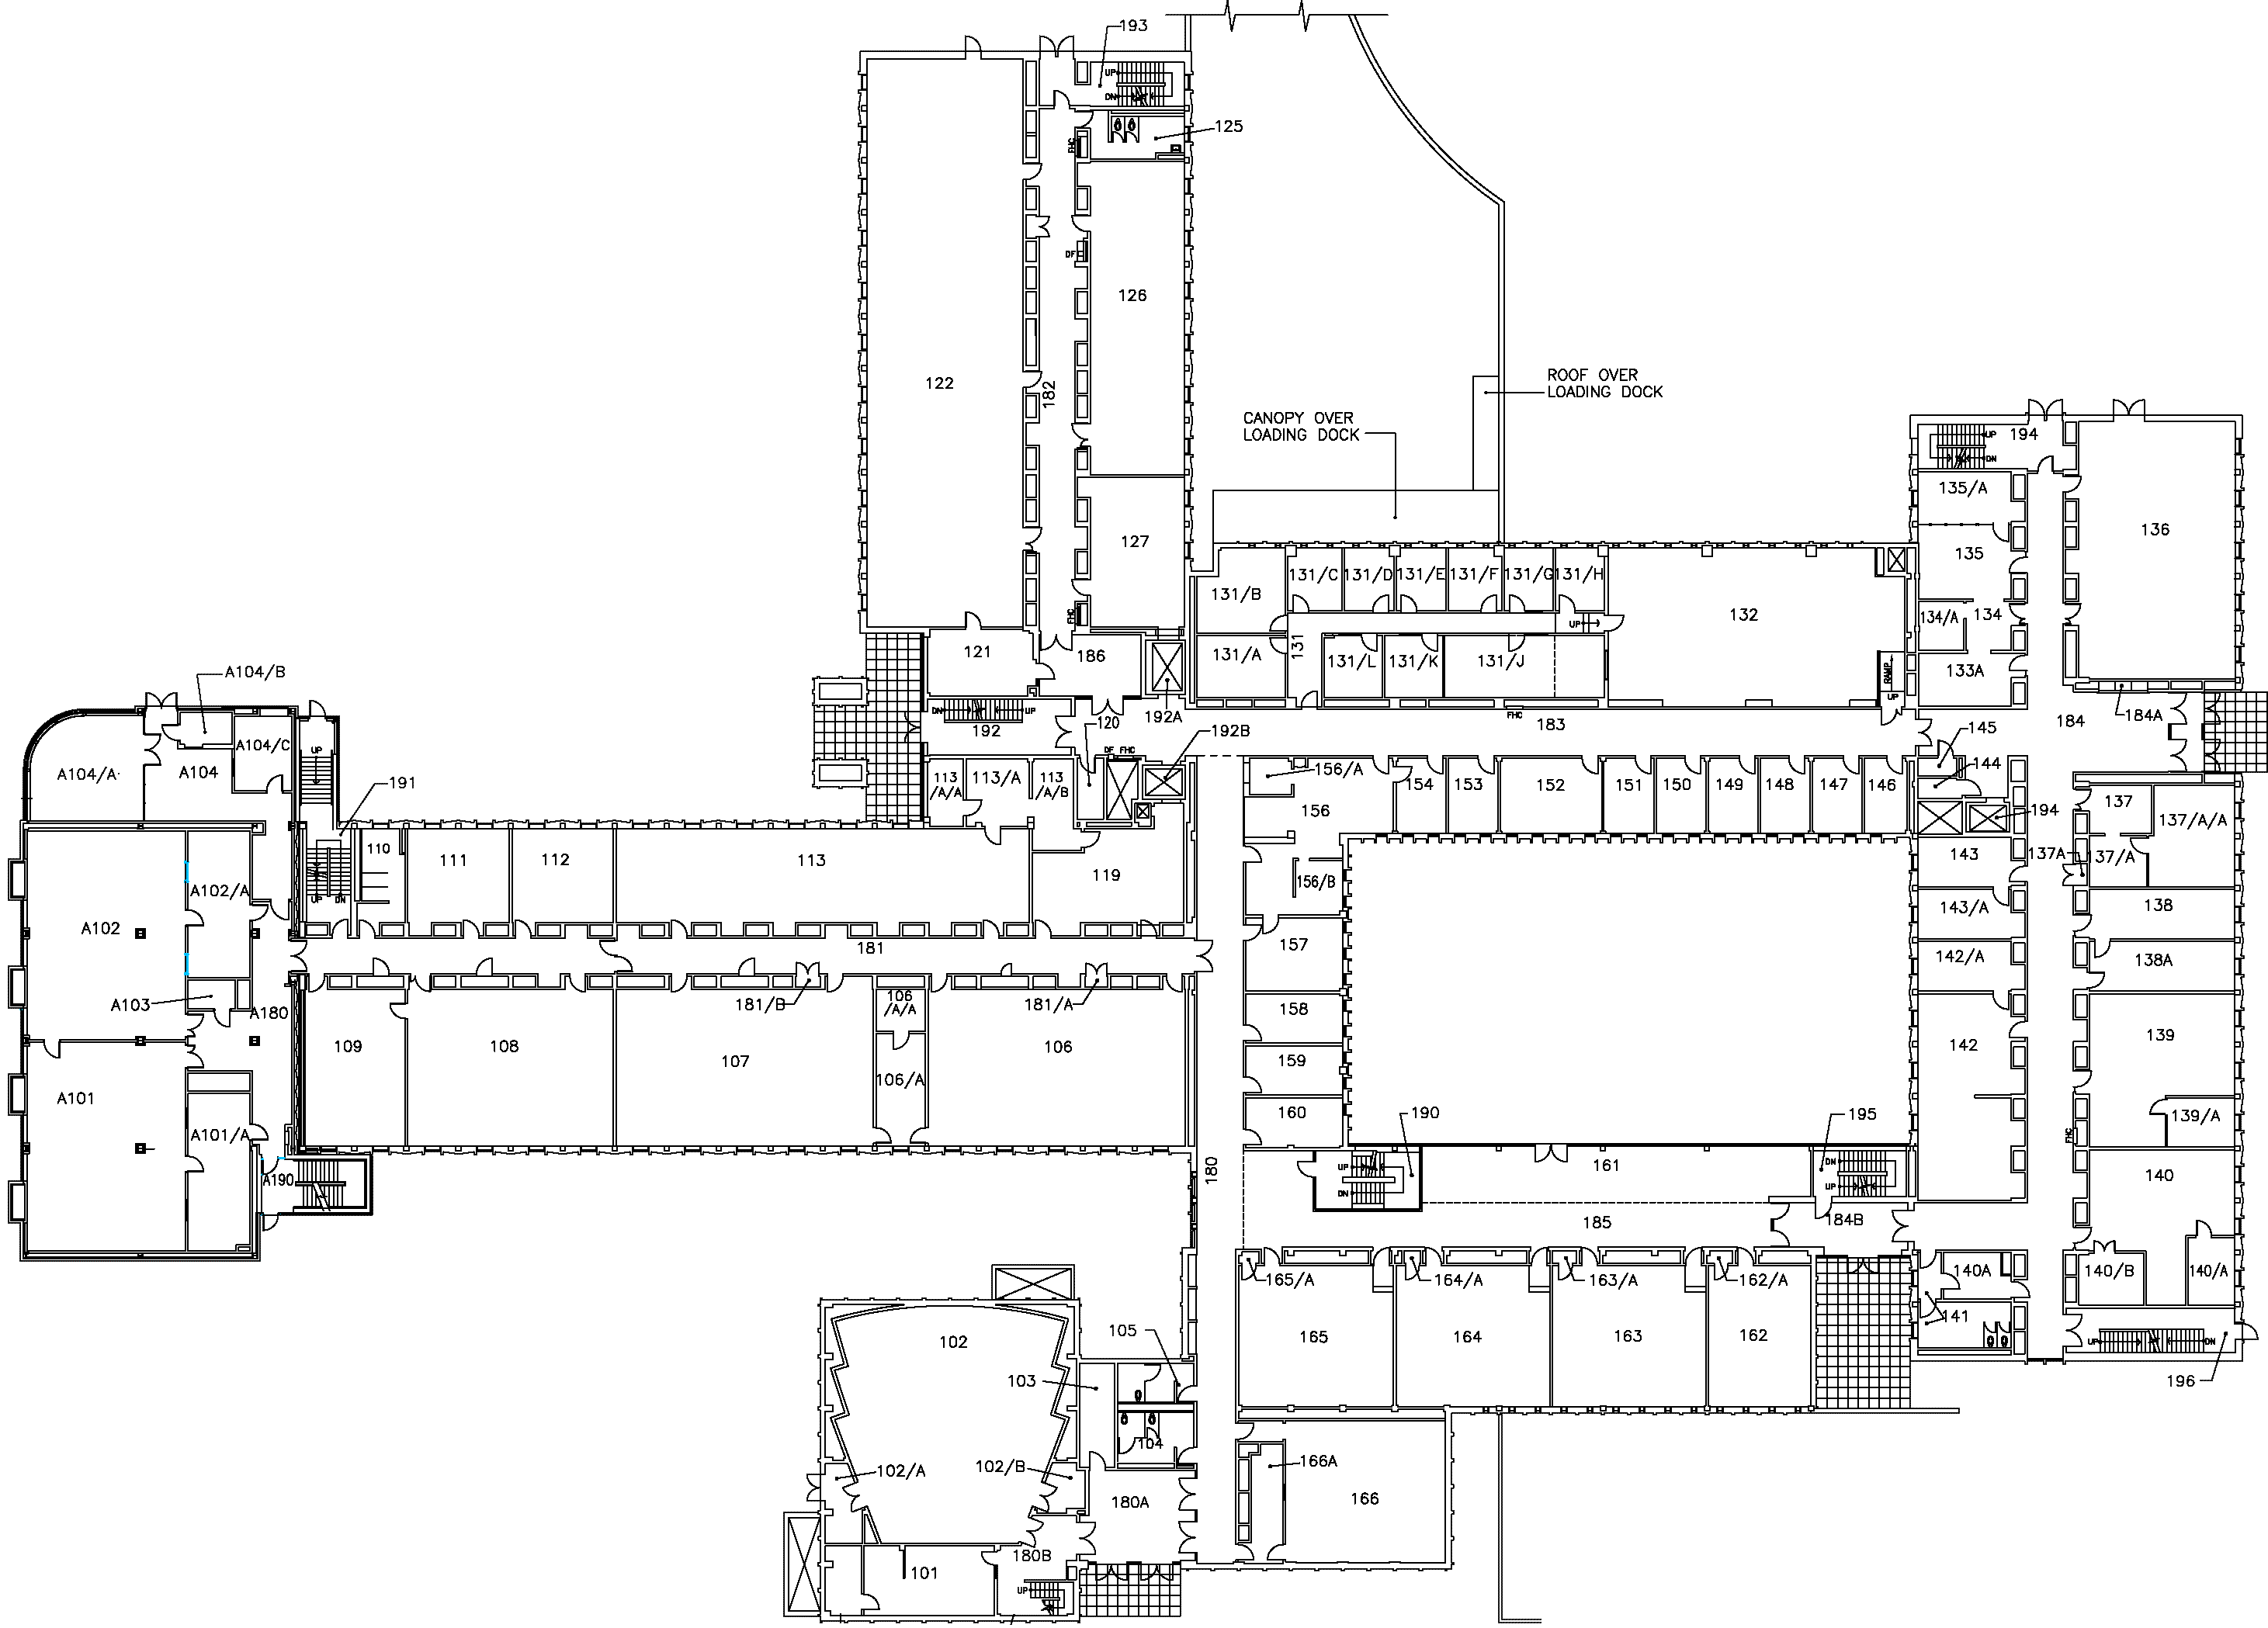 AN Bourns Science Building - First Floor Map